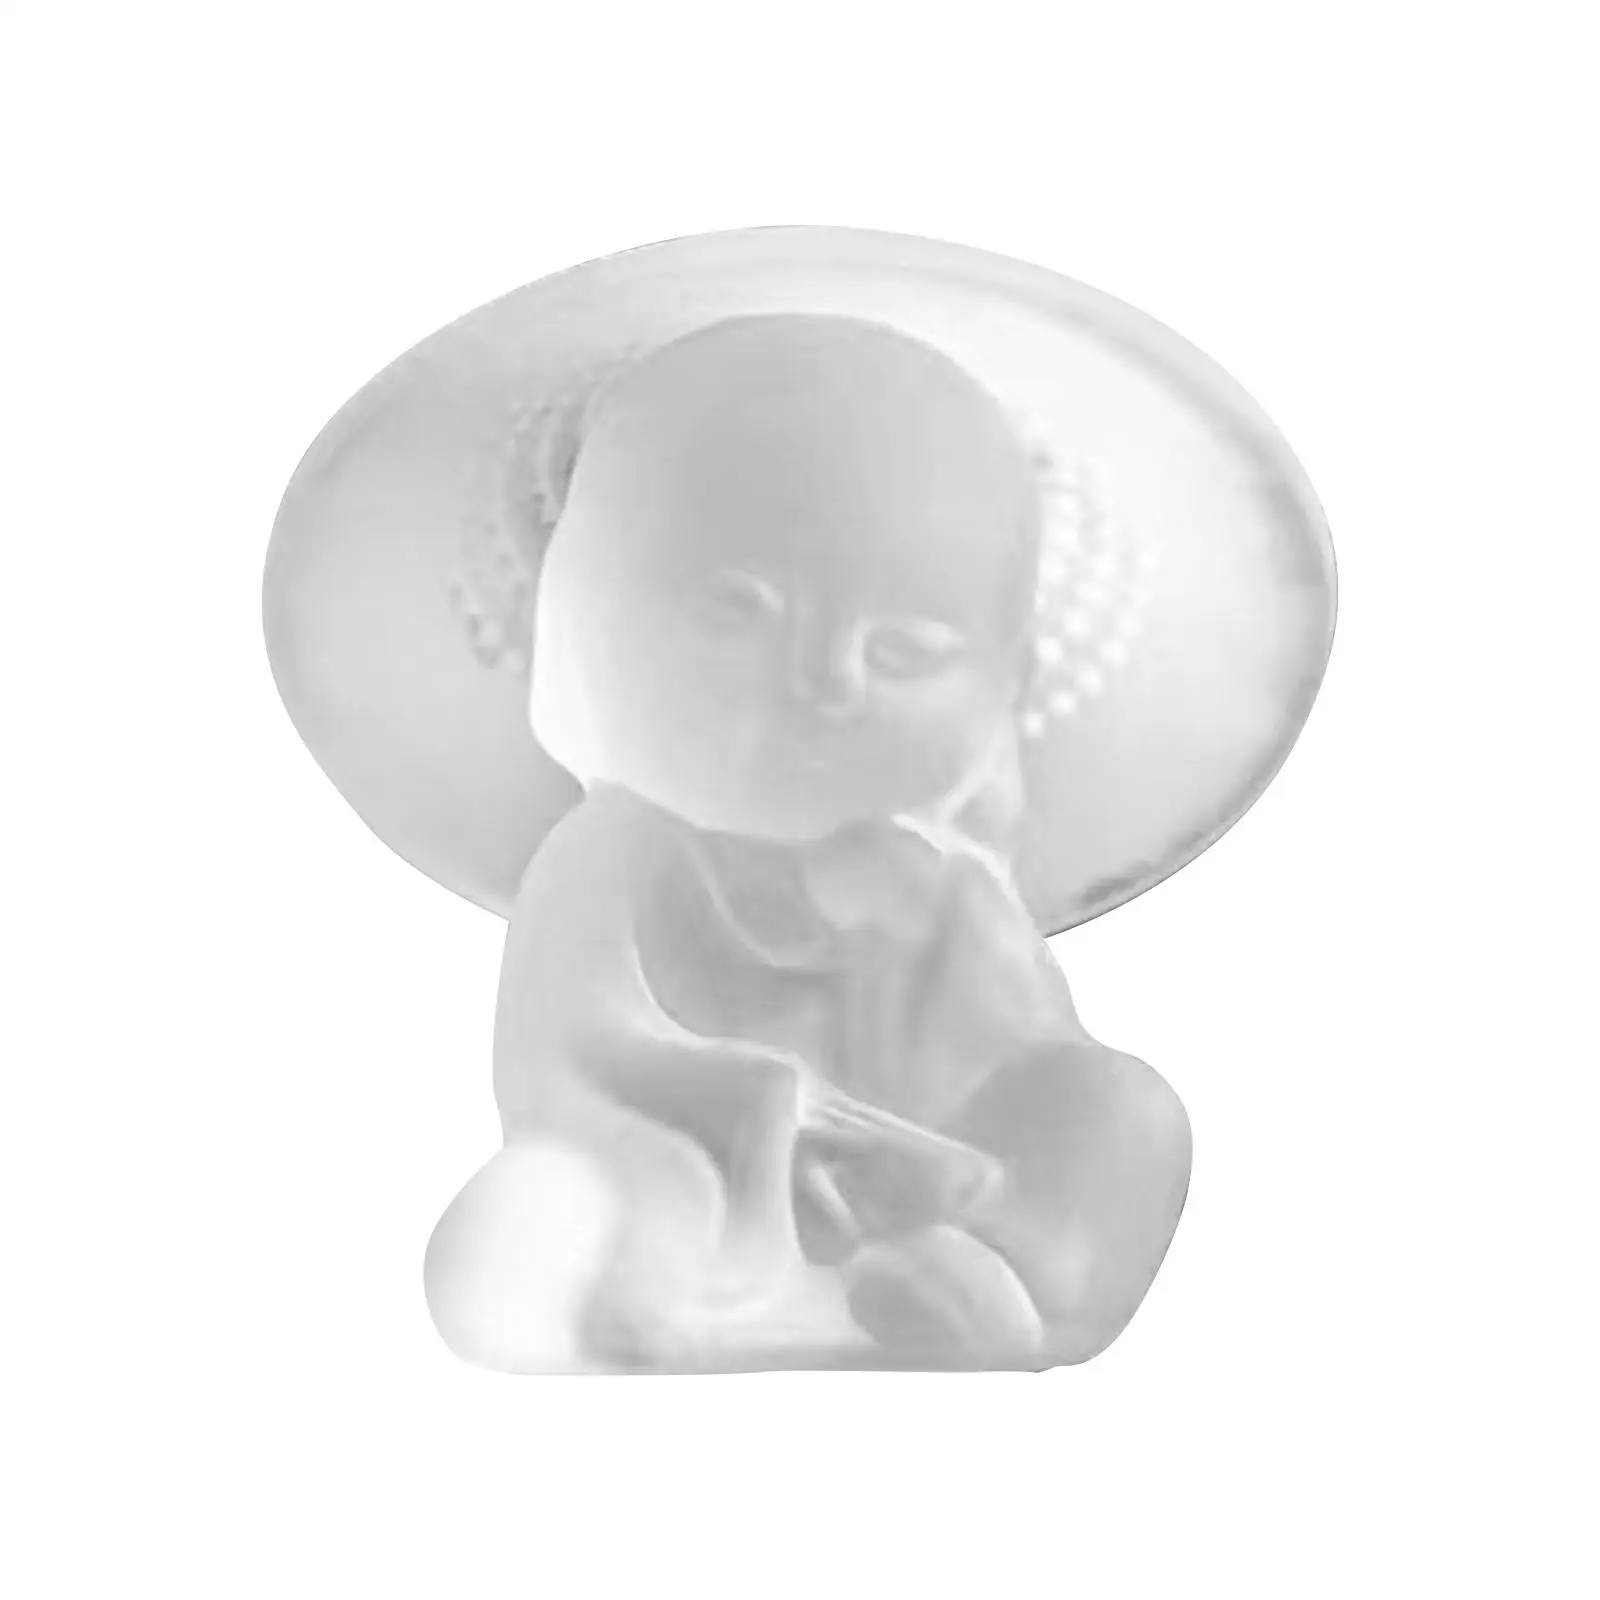 Small Monk Statue Scene Layout Props Transparent for Office Holiday Party